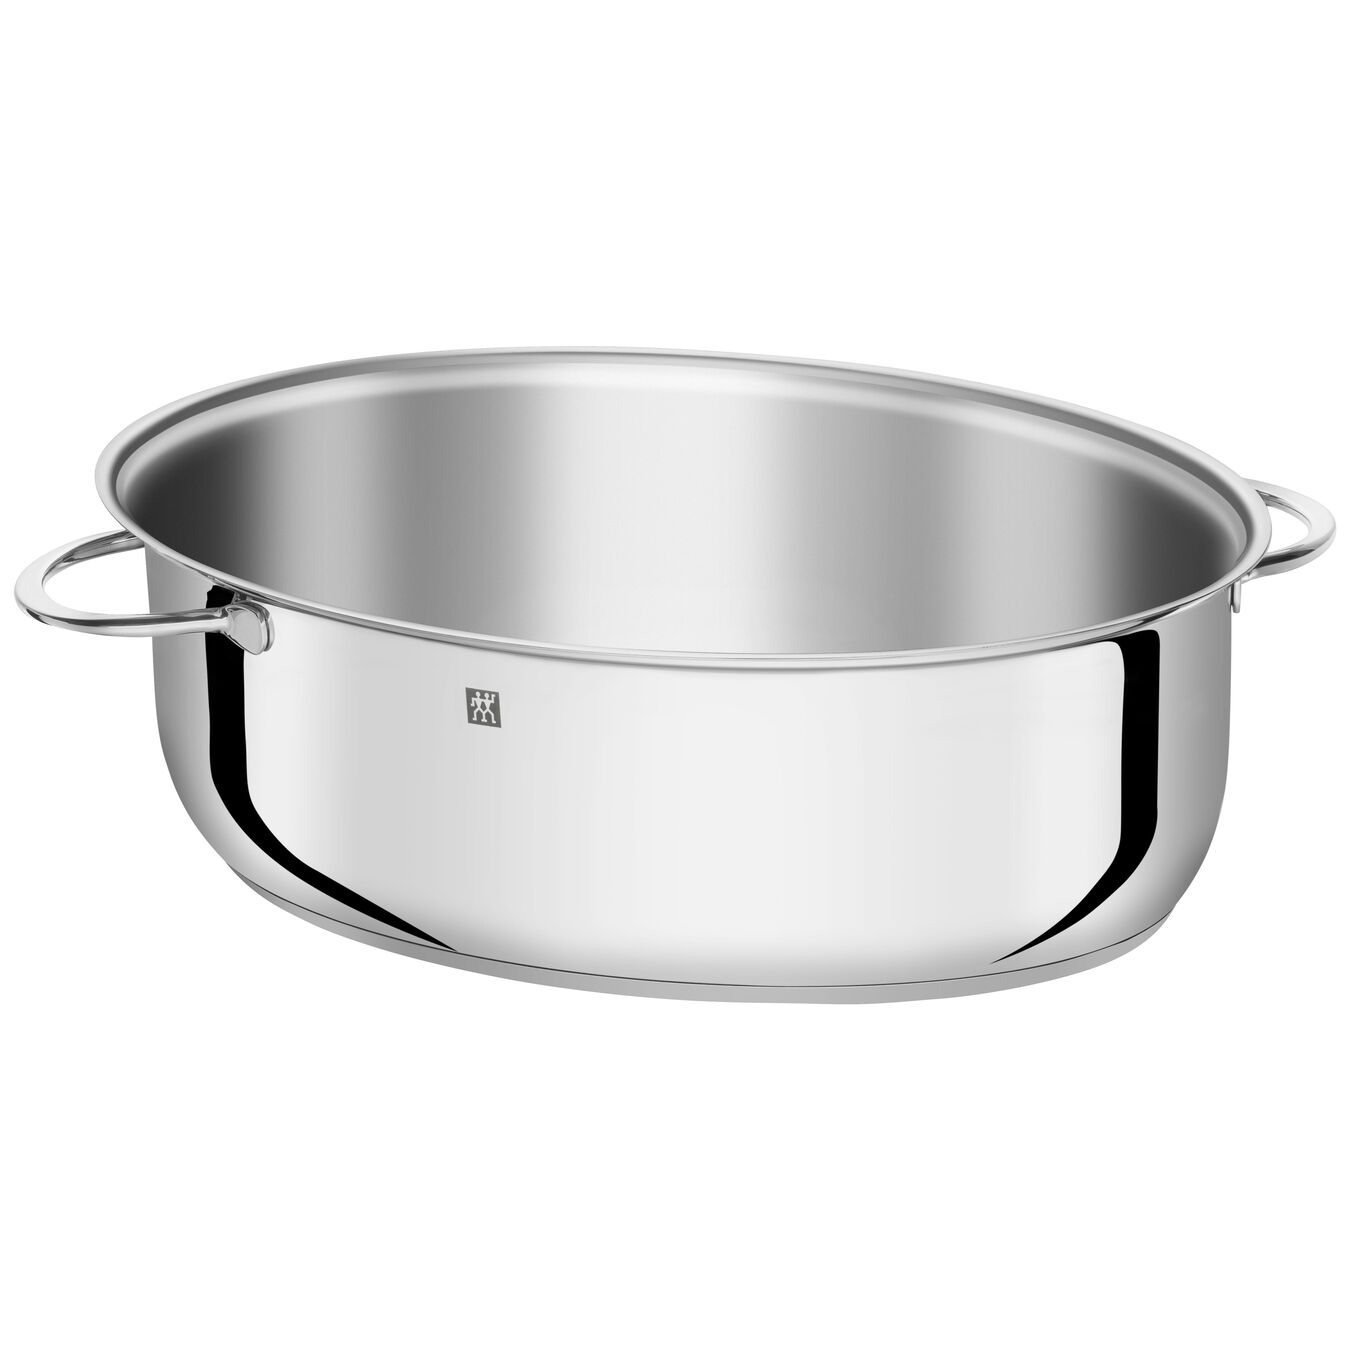 38 cm 18/10 Stainless Steel oval Roaster, silver,,large 4